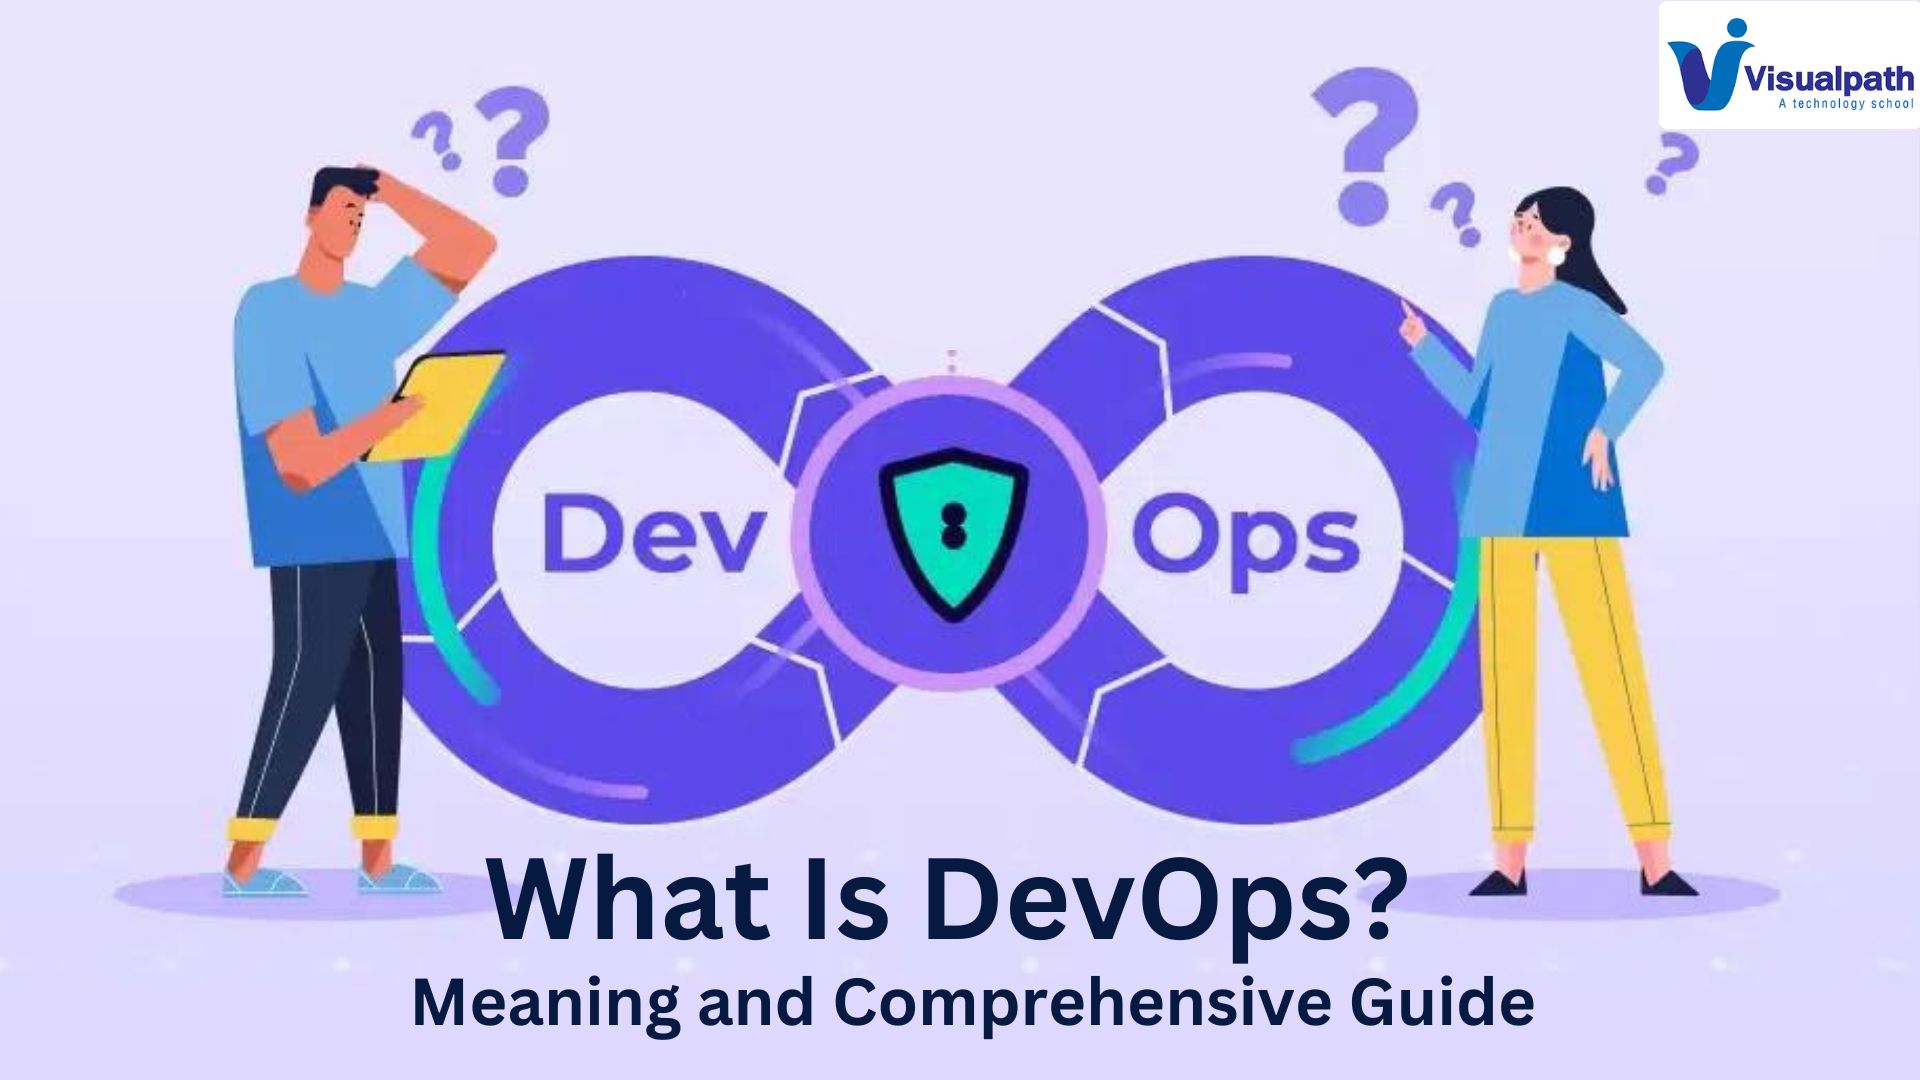 What Is DevOps? Meaning, Methodology, and Comprehensive Guide